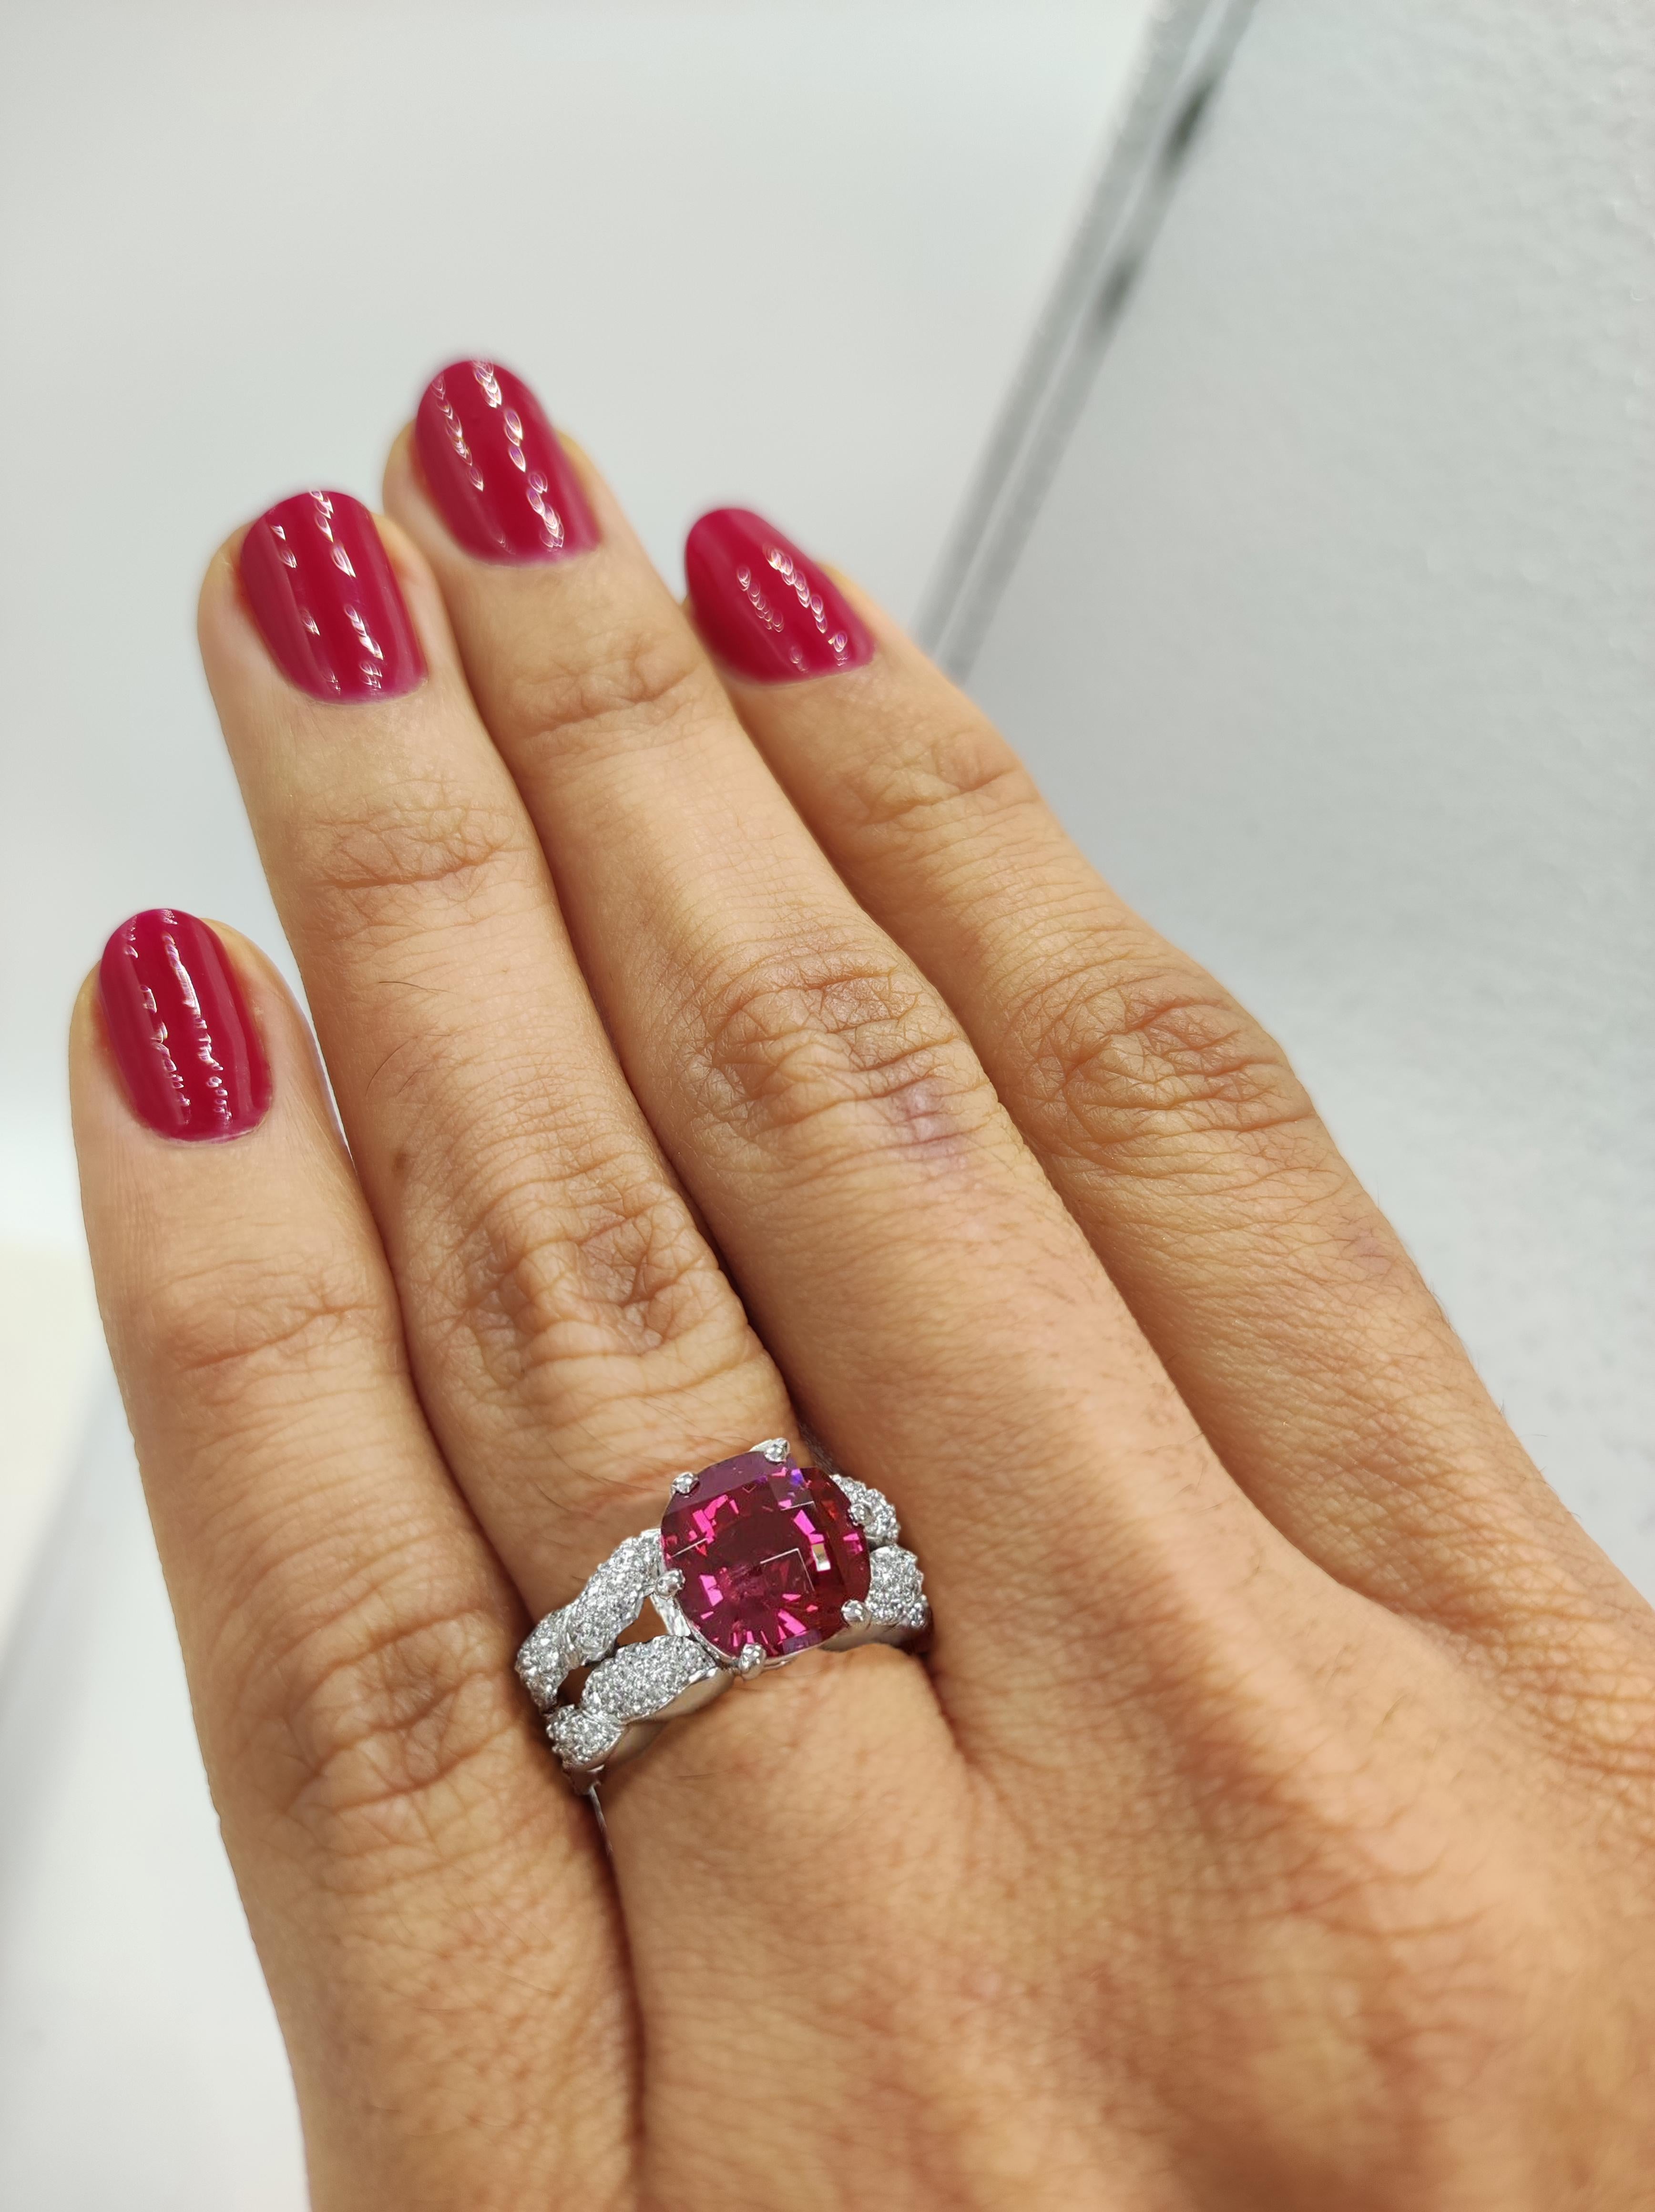 The ring weighs 16.6 grams, size 5.5, the center is a Natural Cushion Mixed Checkerboard Cut Red Spinel without any treatment or enhancement, weighing approximately 4.5 ct based on the measurements. The Spinel has a vivid red color & looks very